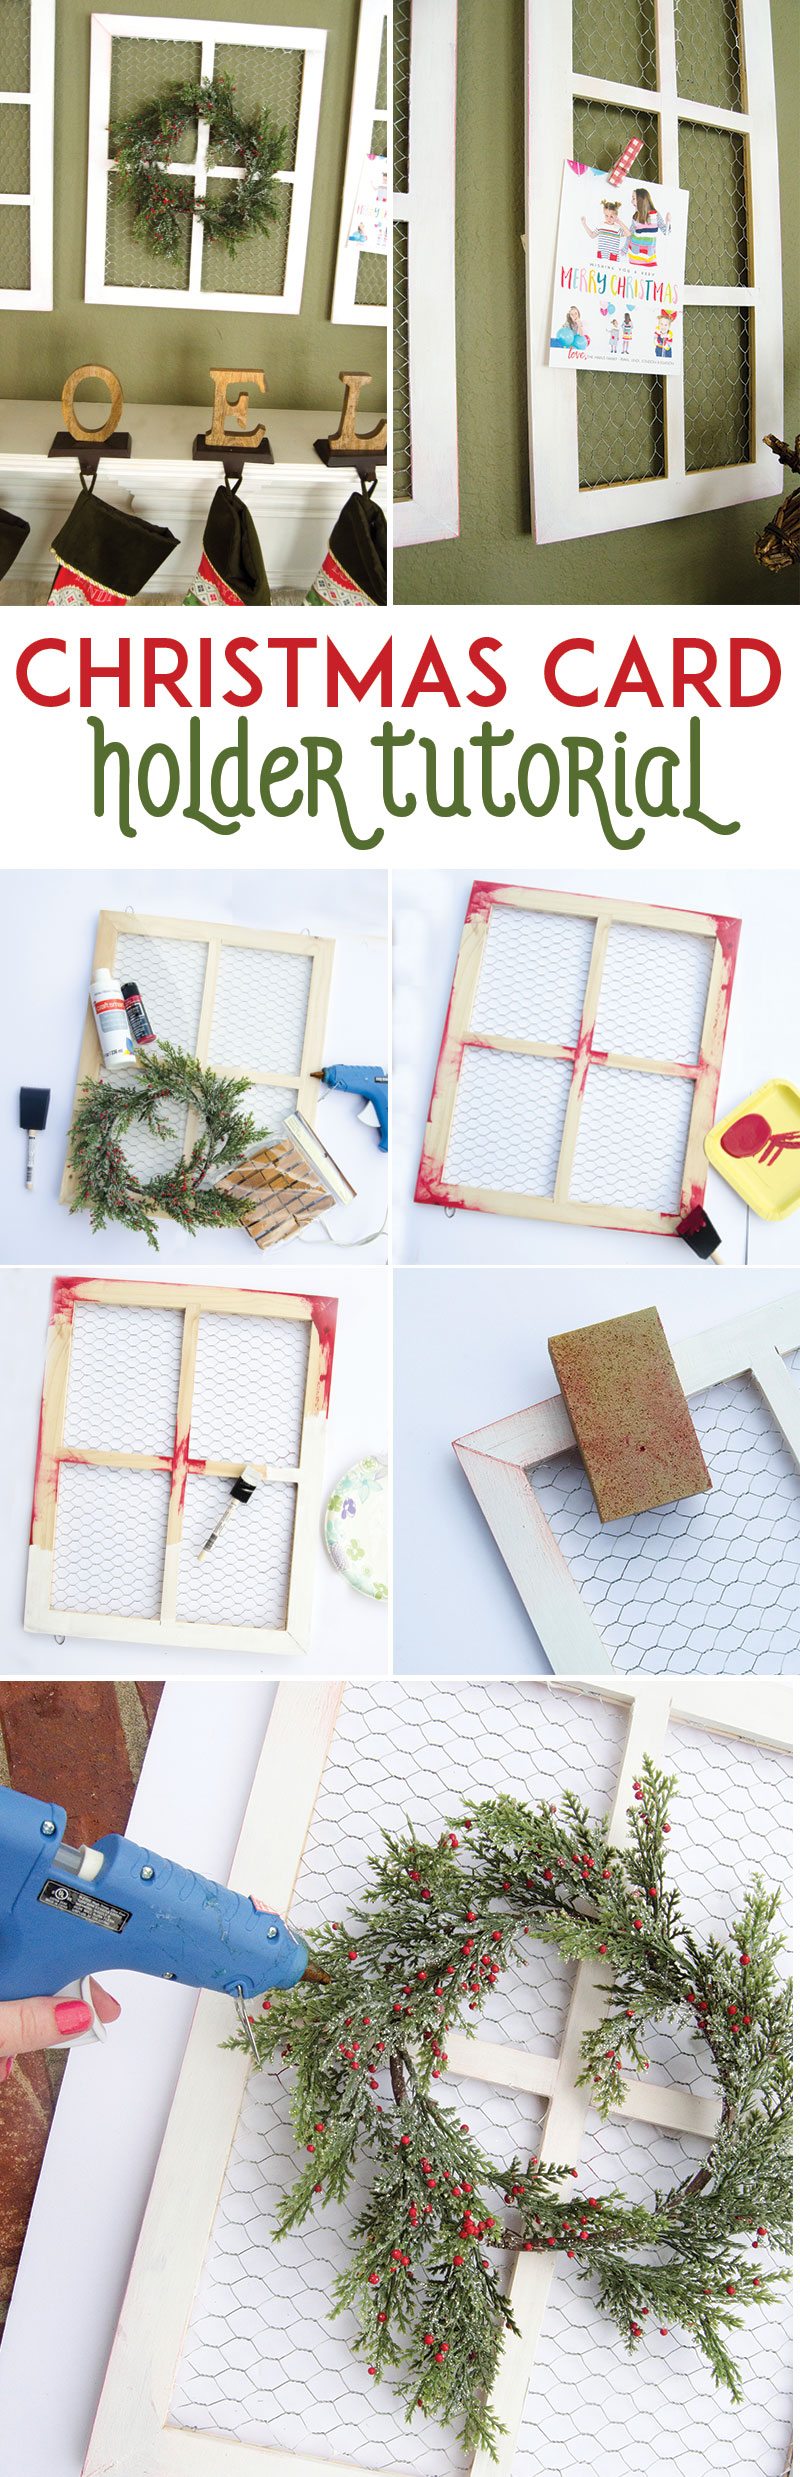 Christmas Card Holder Tutorial by Lindi Haws of Love The Day